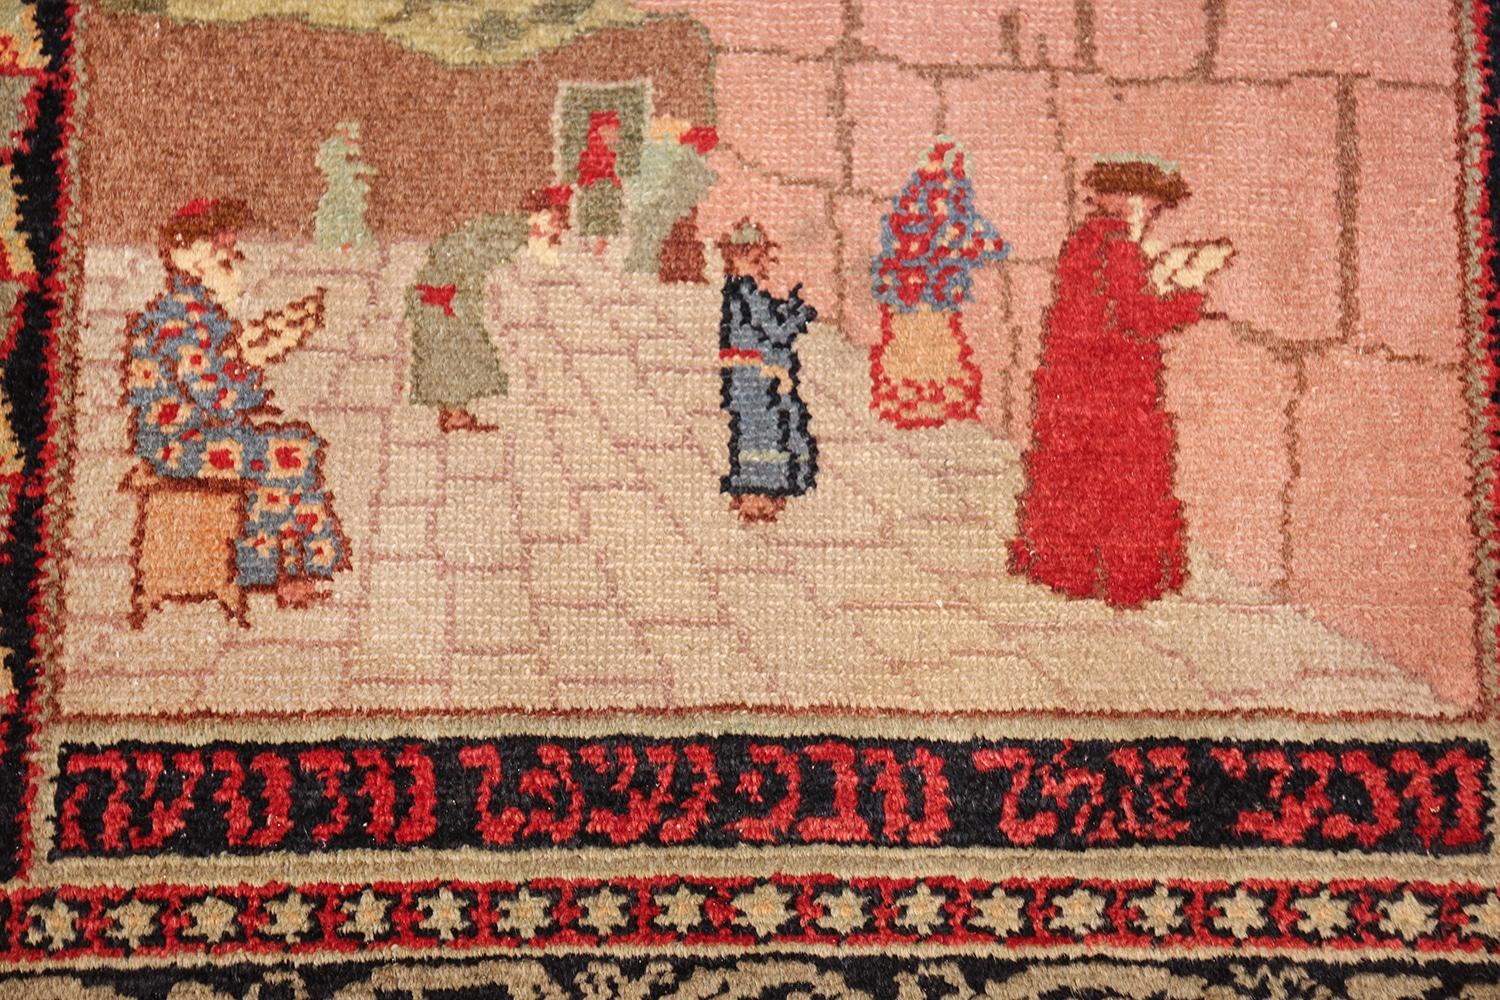 20th Century Pictorial Antique Israeli Marbediah Rug. Size: 2 ft 6 in x 3 ft 6 in  For Sale